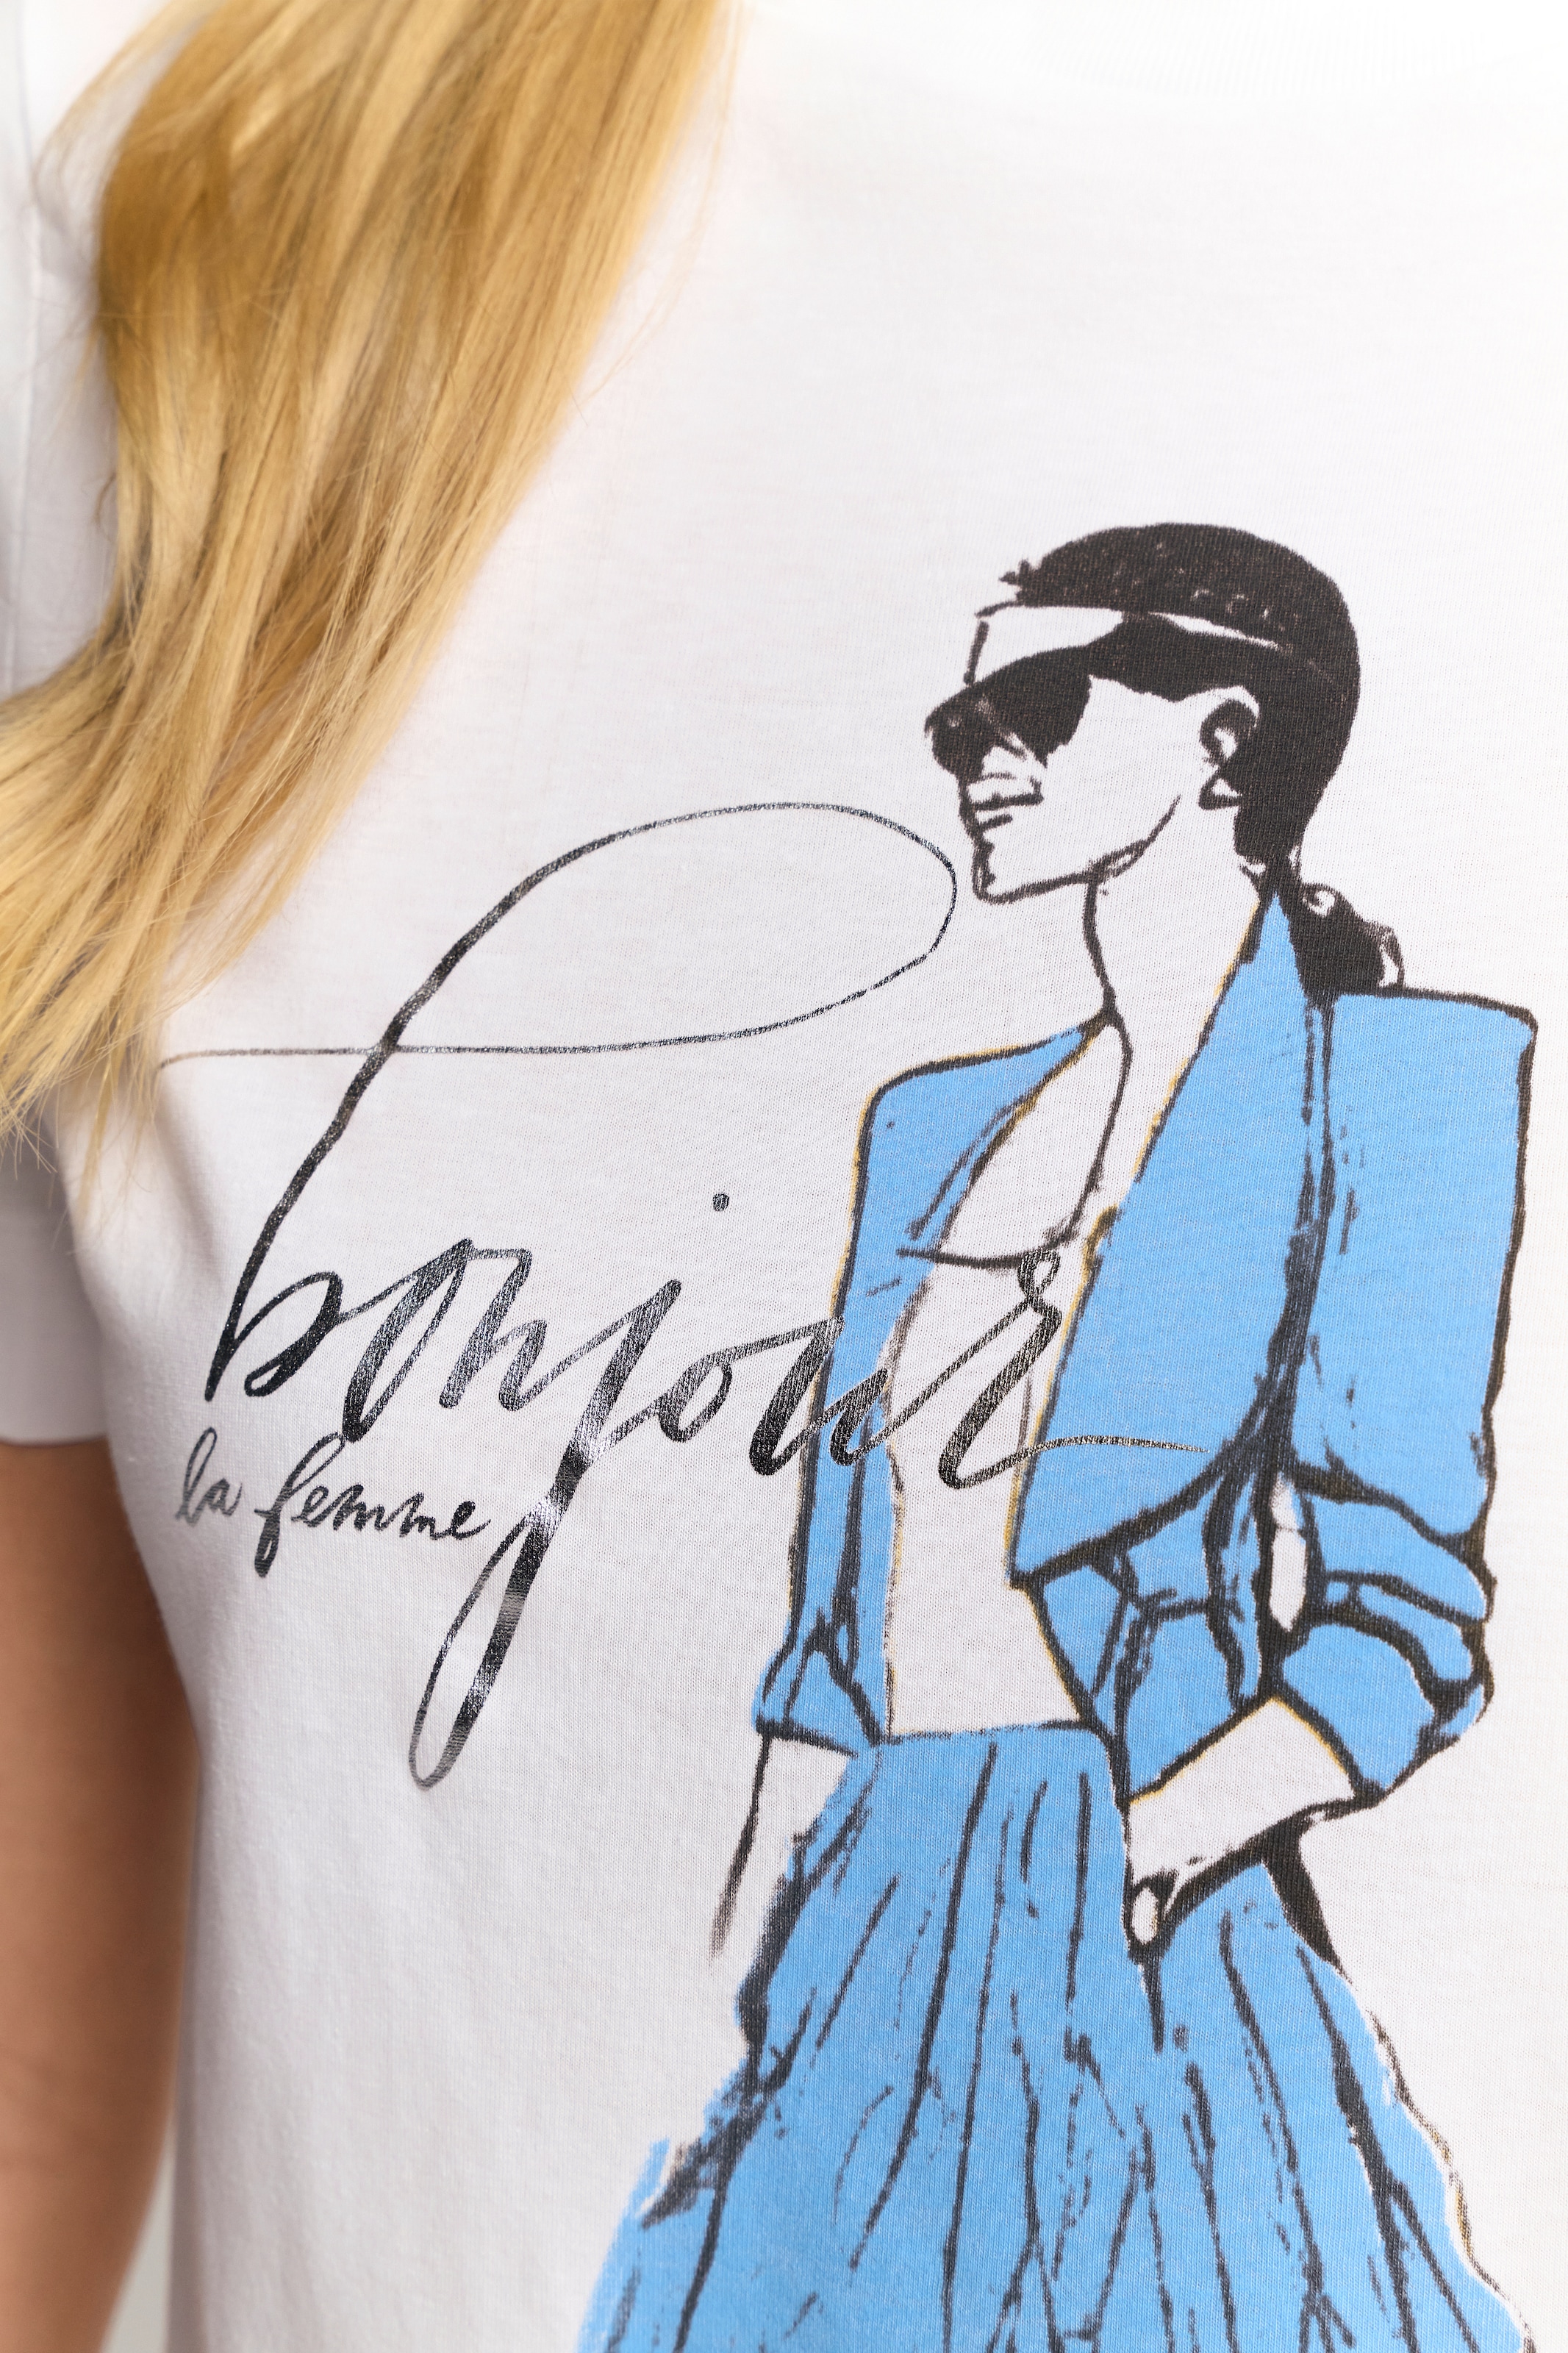 Rich & Royal T-Shirt, Easy fit T-Shirt "Bonjour" with woman print